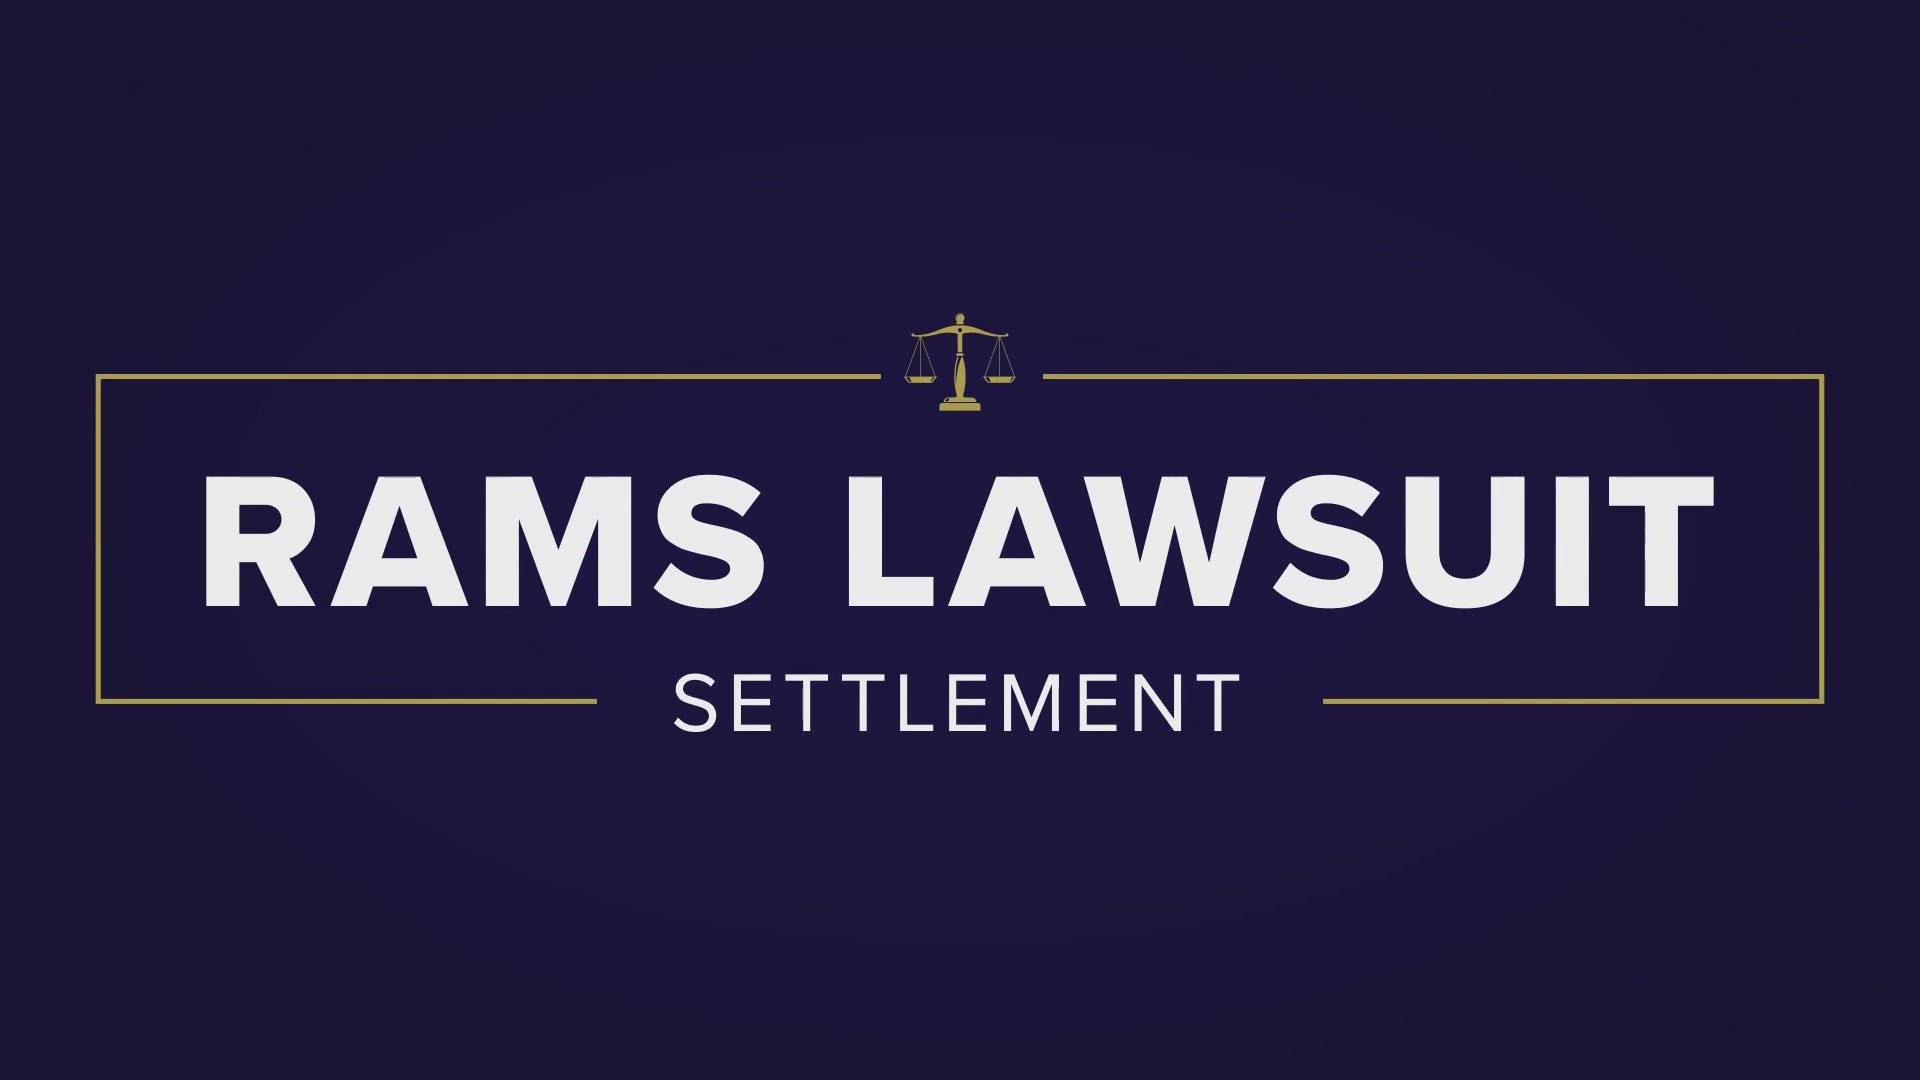 St. Louis officials on Tuesday will discuss the portion of the Rams settlement that is designated to go toward the expansion of the downtown convention center.